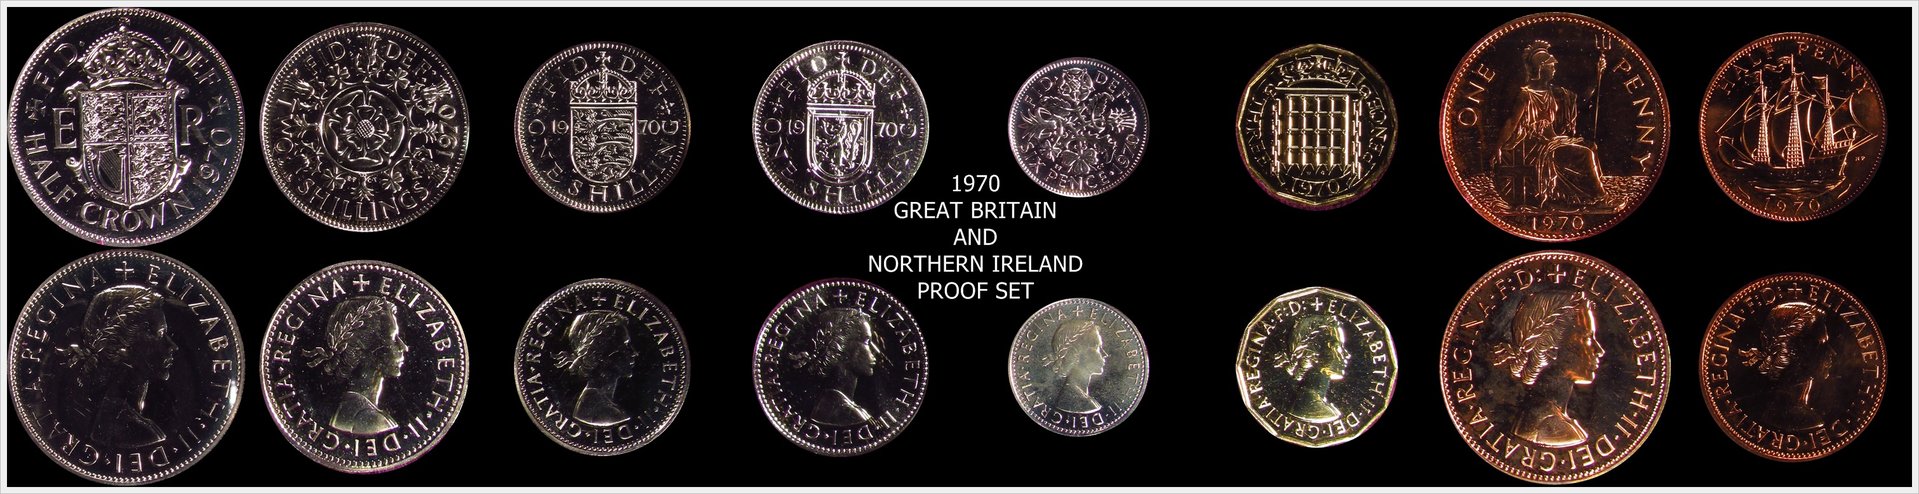 1970 great britain northern ireland %0D%0A	proofs.jpg